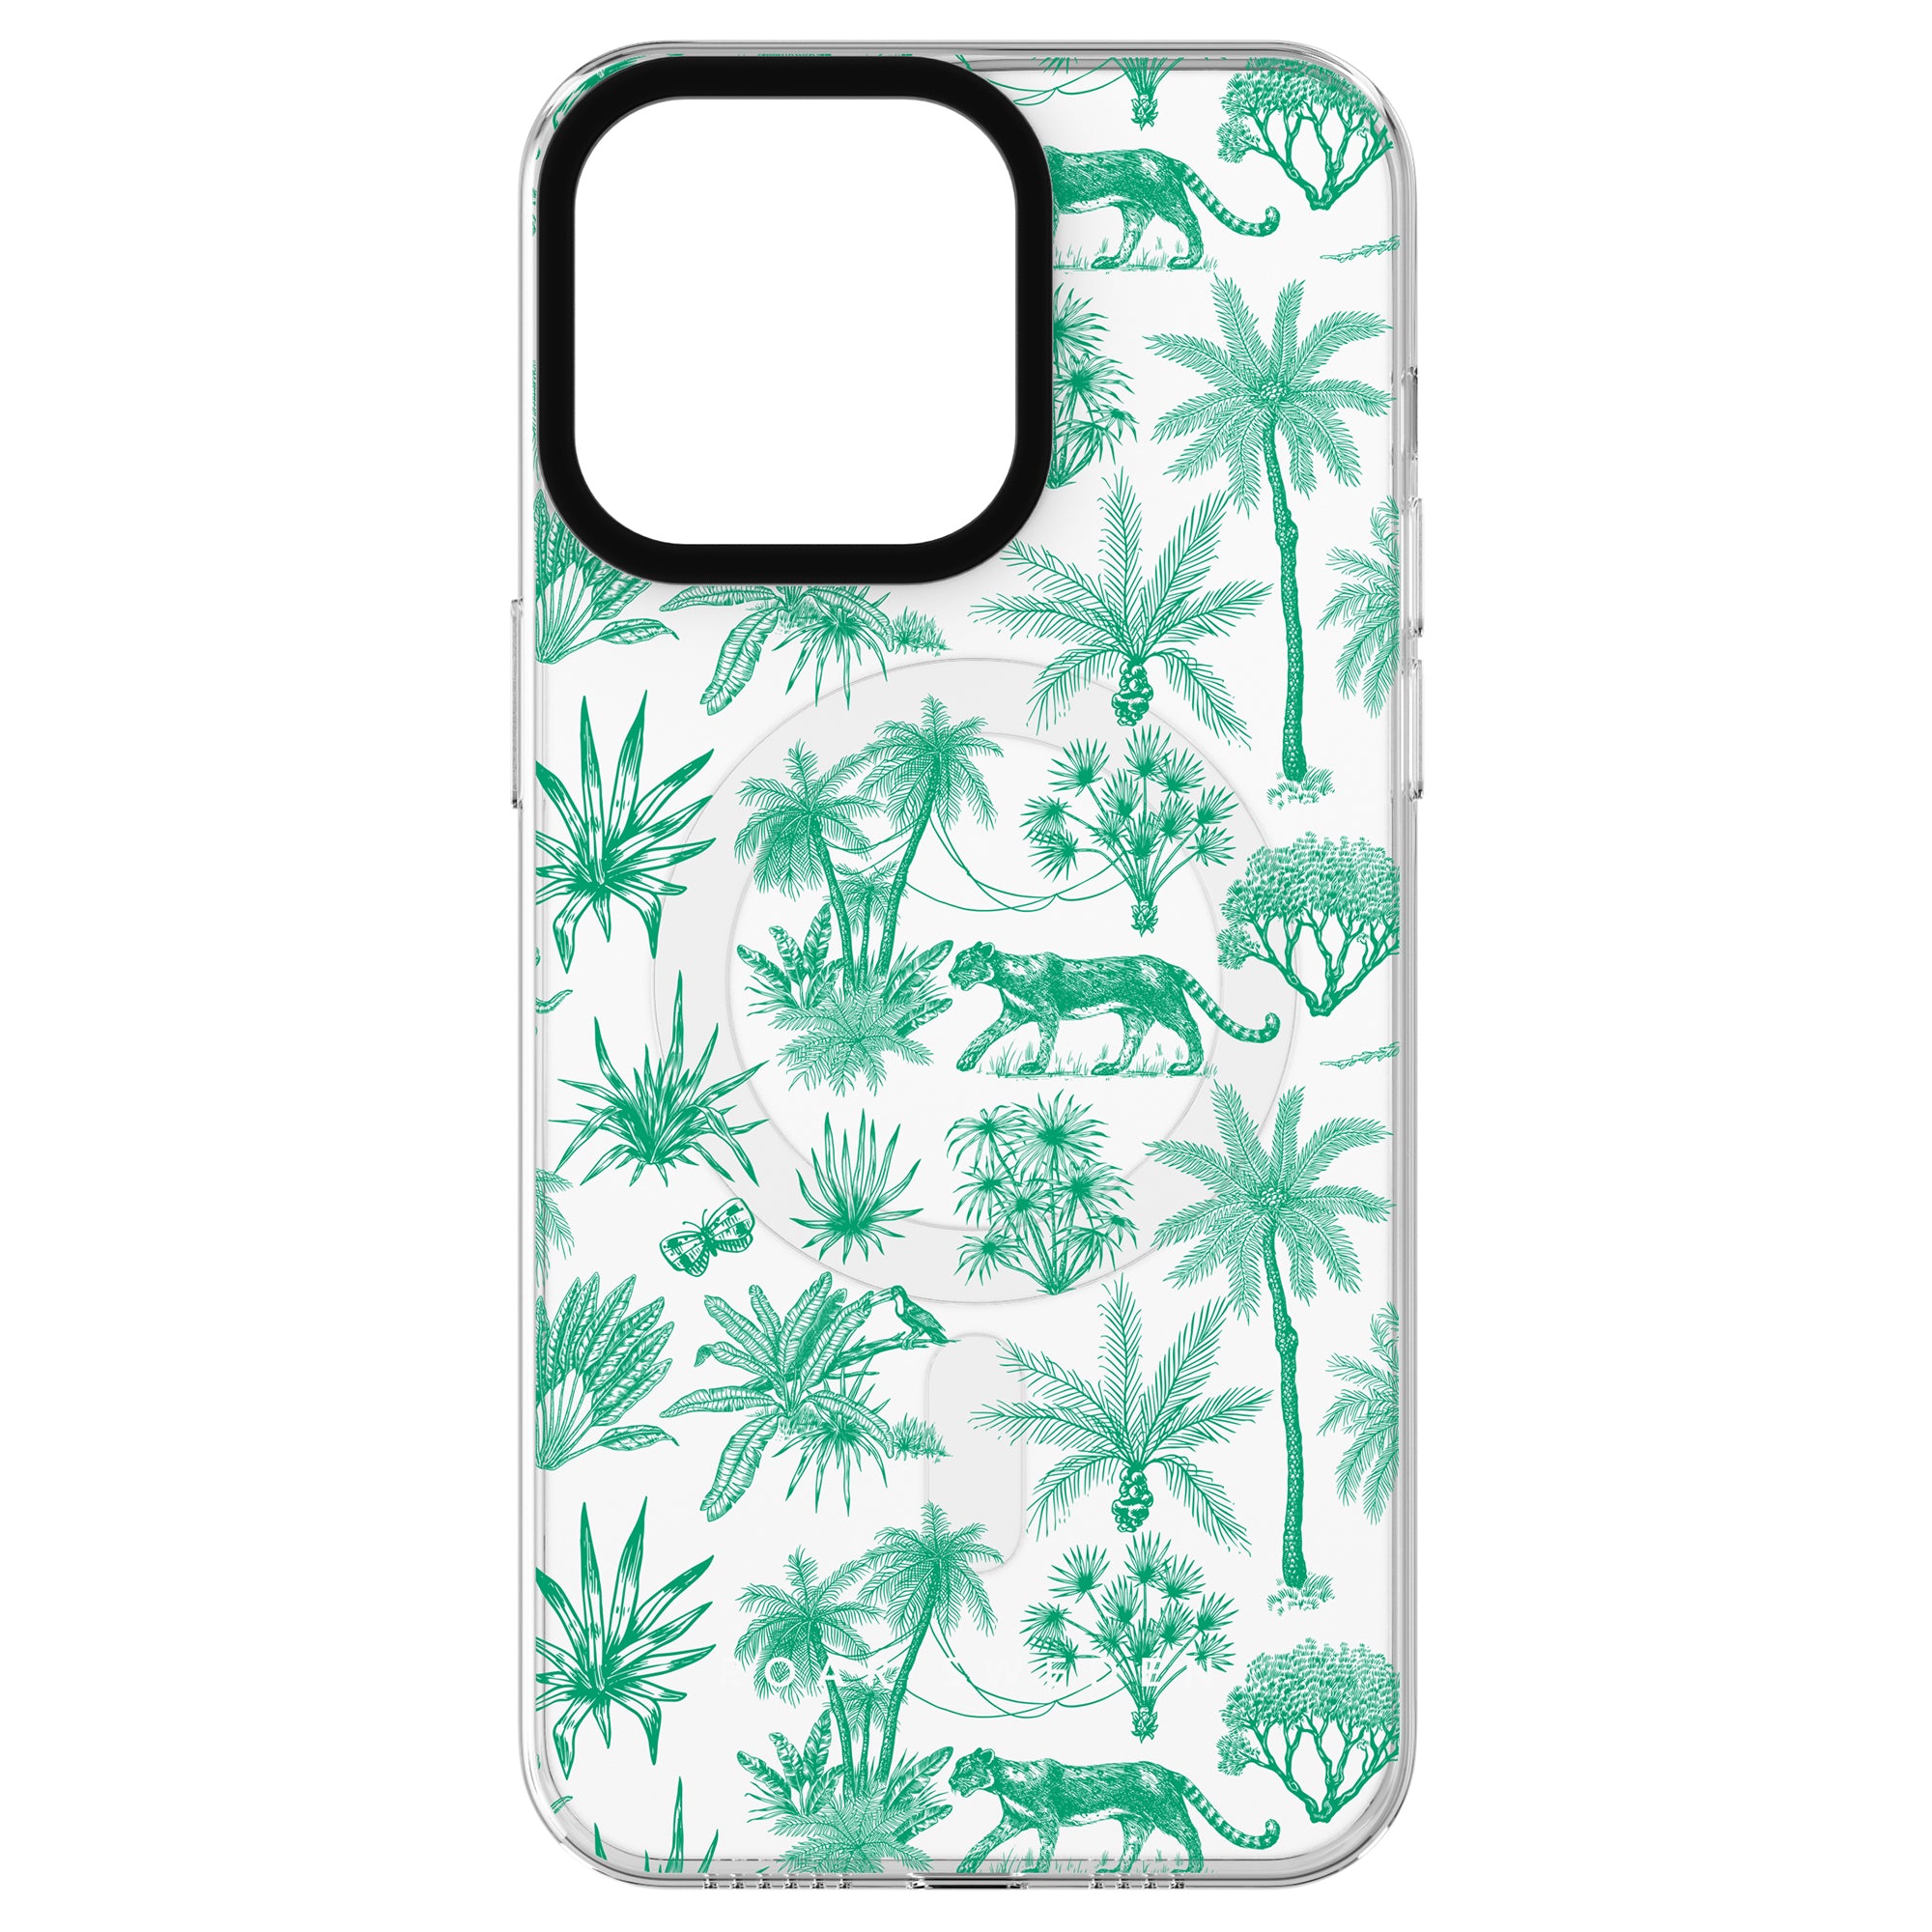 A sleek Toile De Jouy Mint - MagSafe case featuring a green tropical plant and big cat design on a white background, inspired by the elegance of Toile De Jouy Mint.